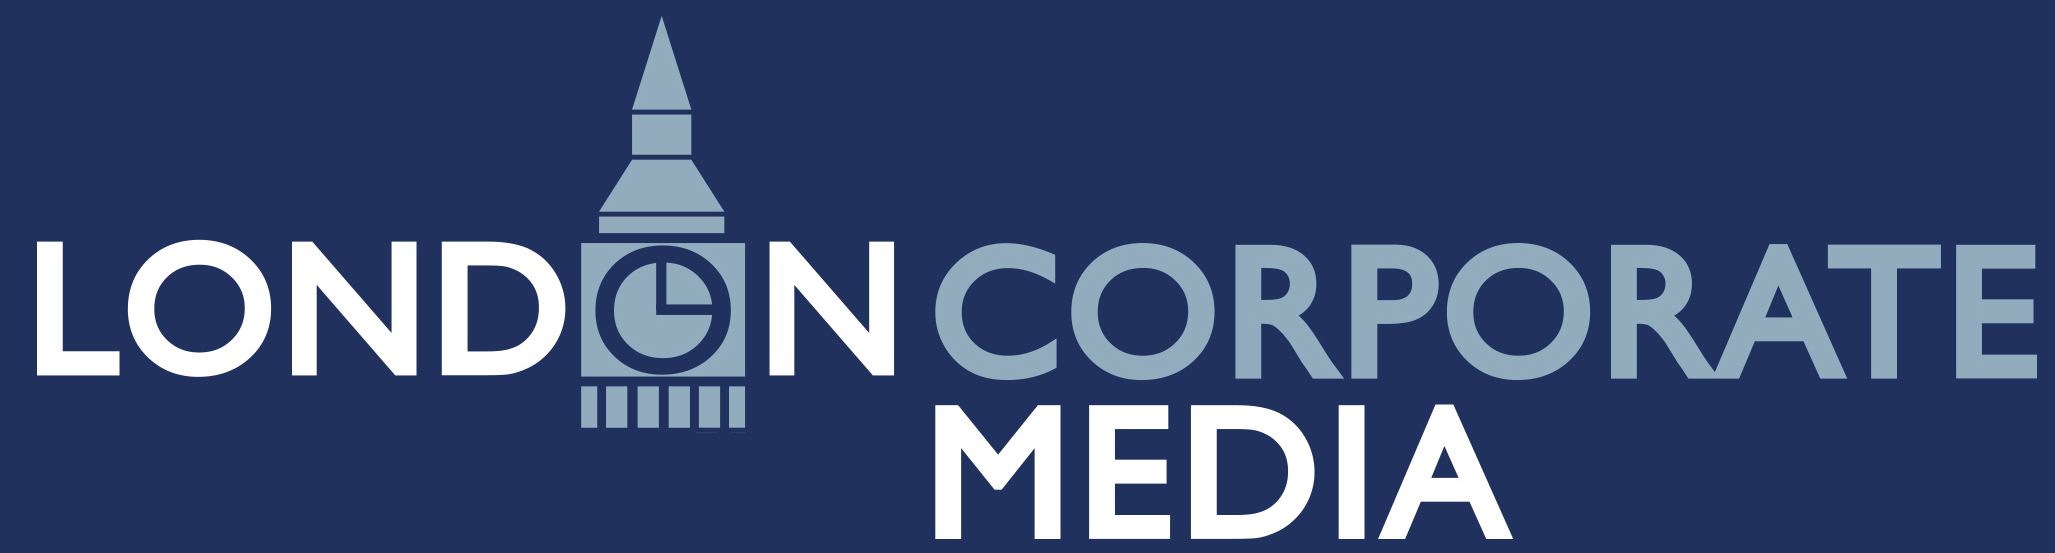 London Corporate Media Footer Icon